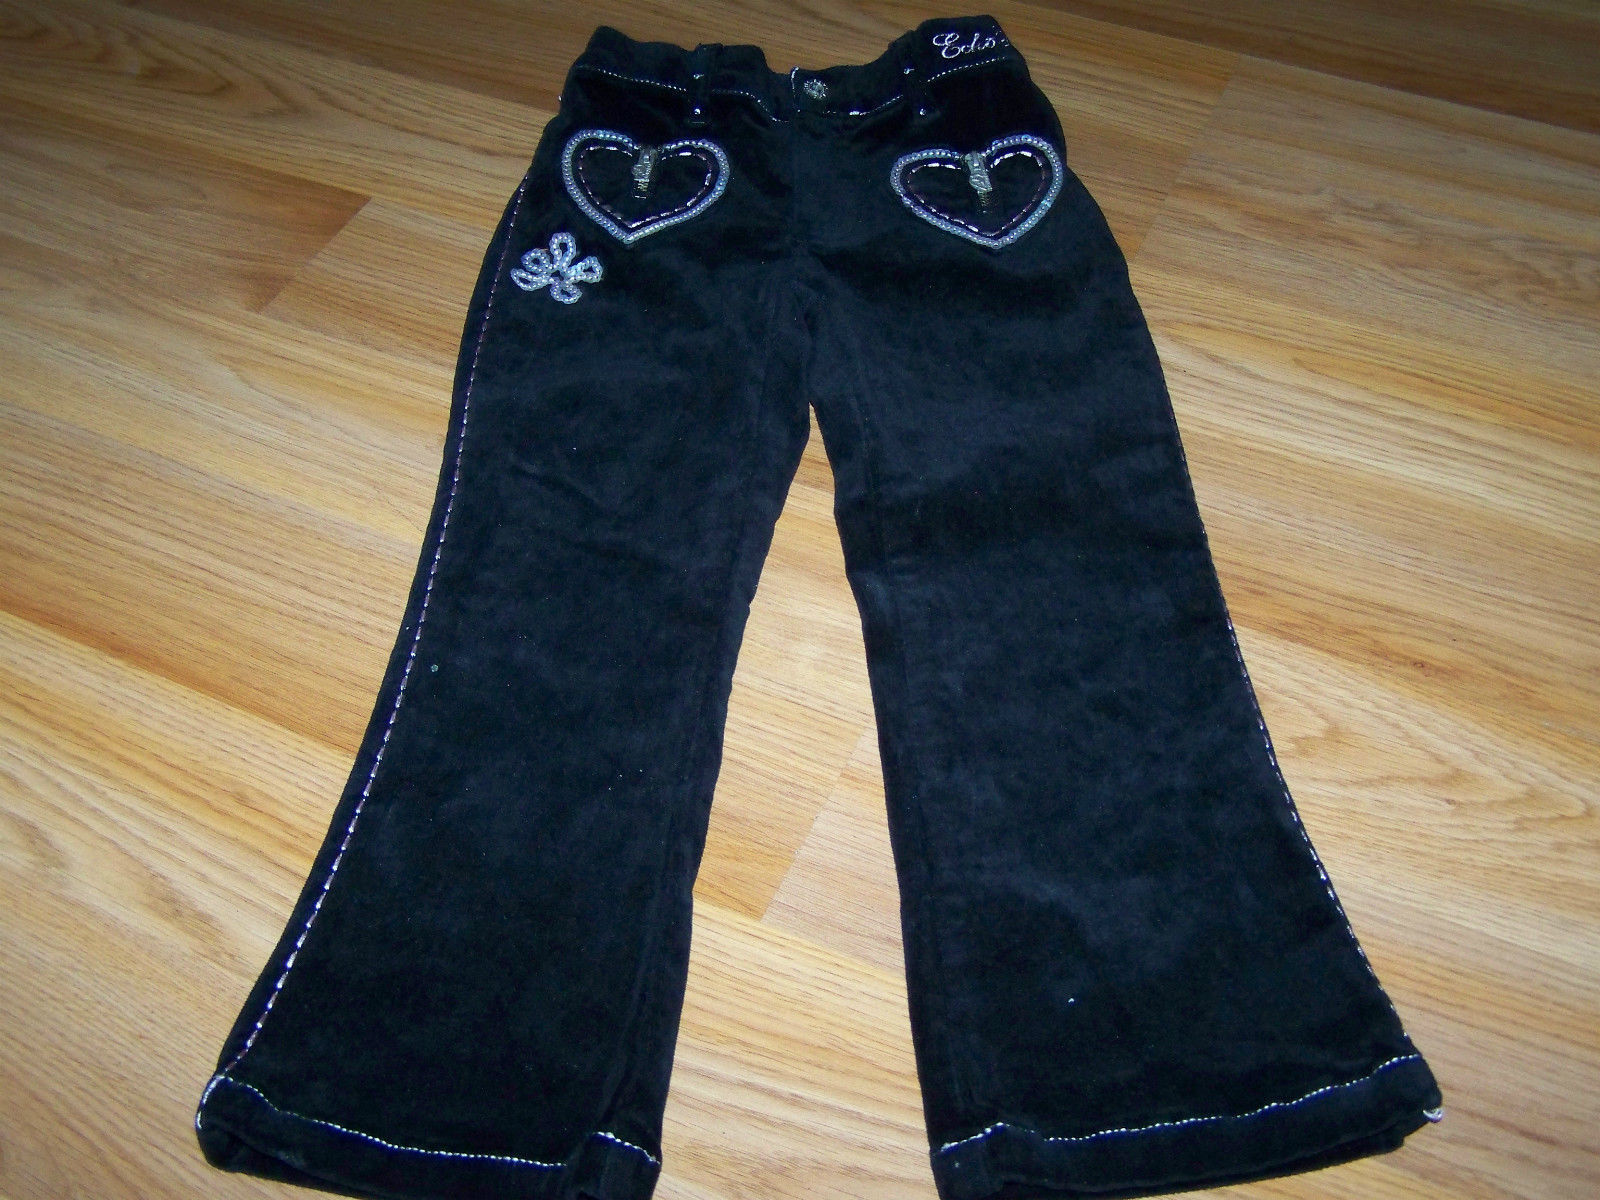 Girls Size 4 Ecko Red Black Velour Pants with Heart Pockets Boot Cut Sequined  - $15.00